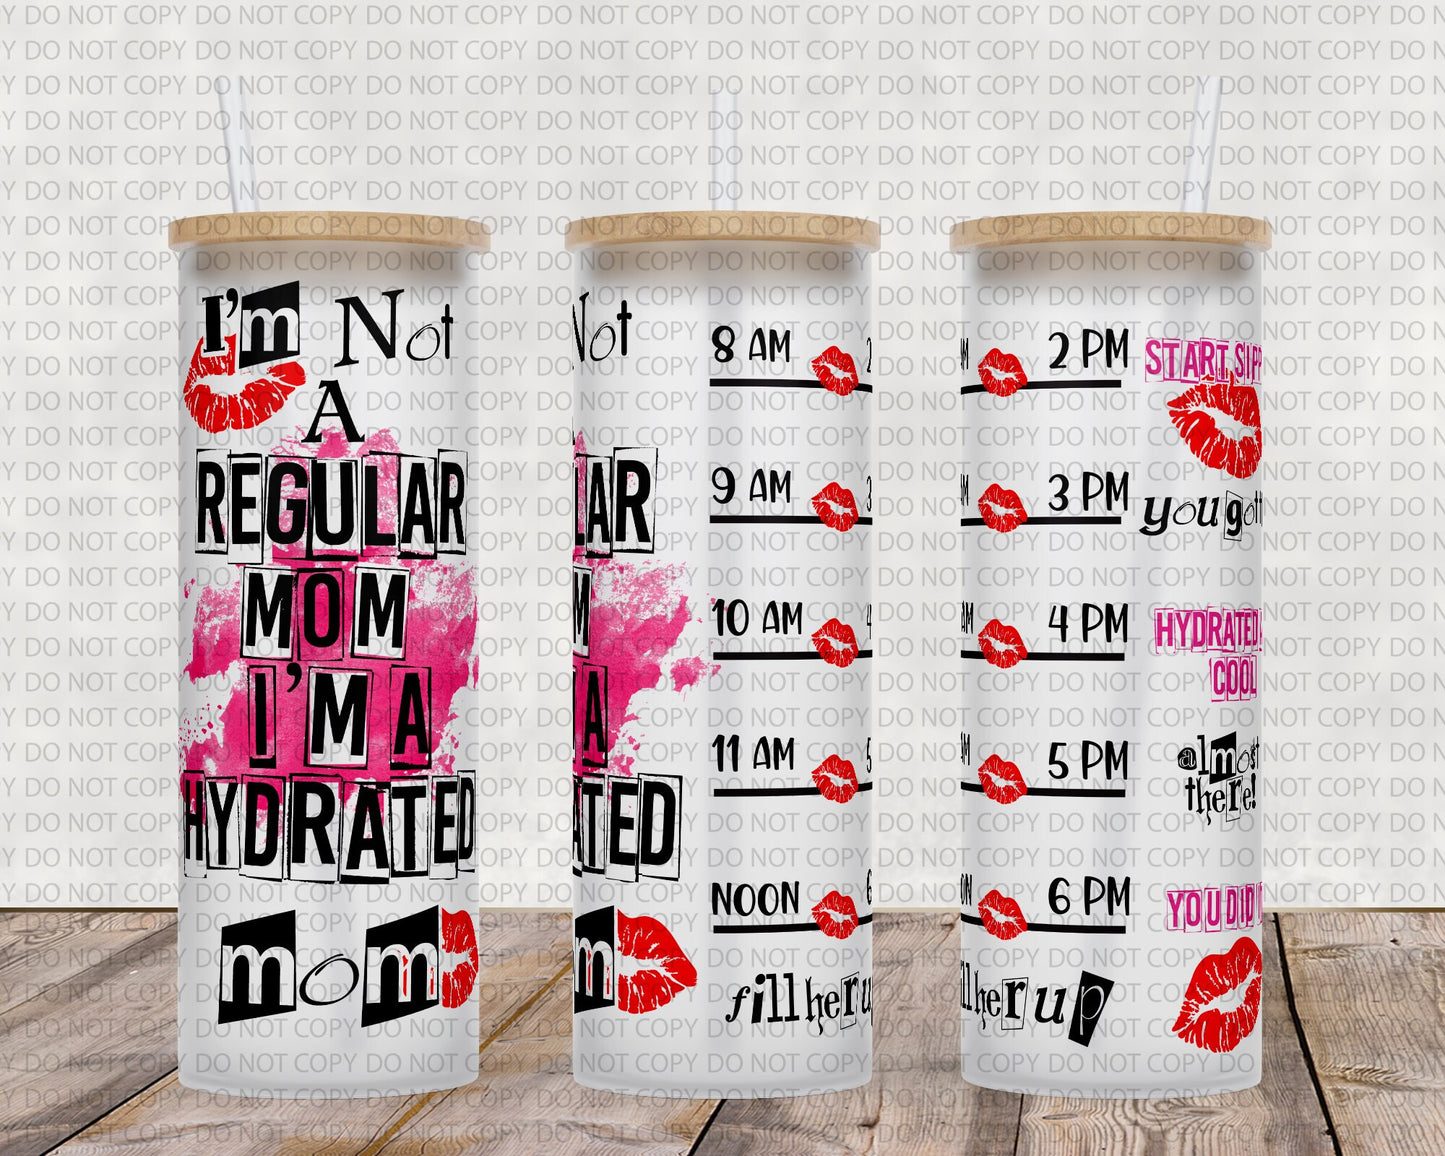 25 oz glass tumbler hydrated mom Water tracker 20/25 ounce wrap for sublimation, waterslide High res PNG digital file